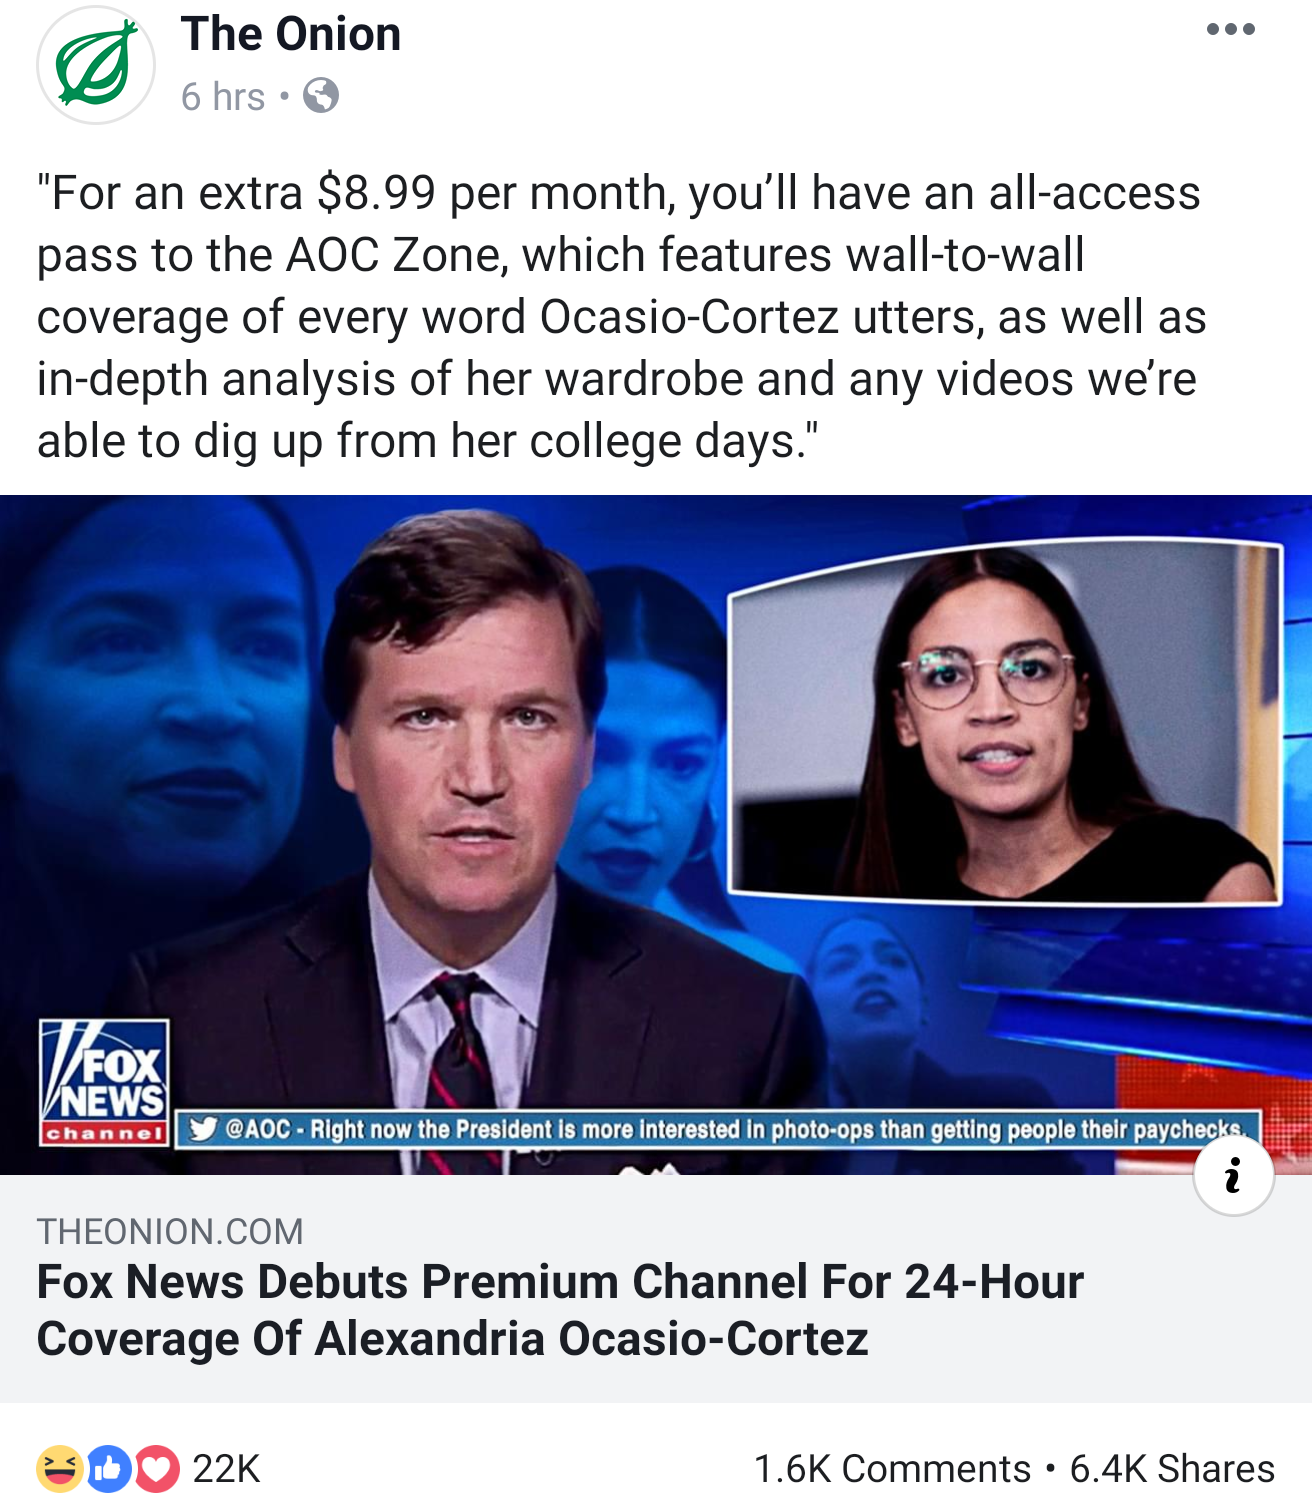 political meme fox news aoc - The Onion 6 hrs. "For an extra $8.99 per month, you'll have an allaccess pass to the Aoc Zone, which features walltowall coverage of every word OcasioCortez utters, as well as indepth analysis of her wardrobe and any videos w